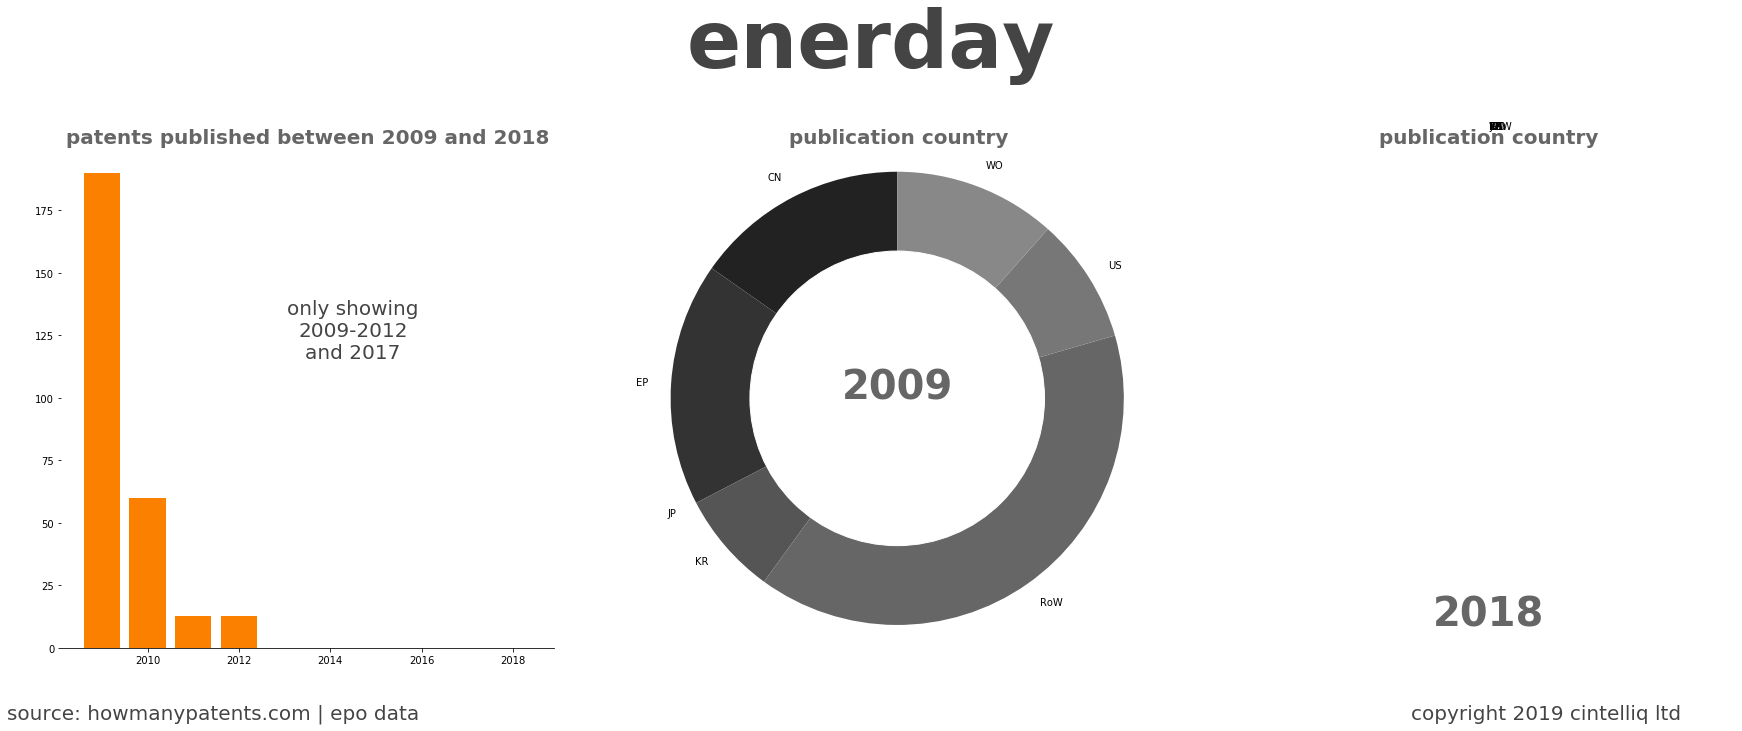 summary of patents for Enerday